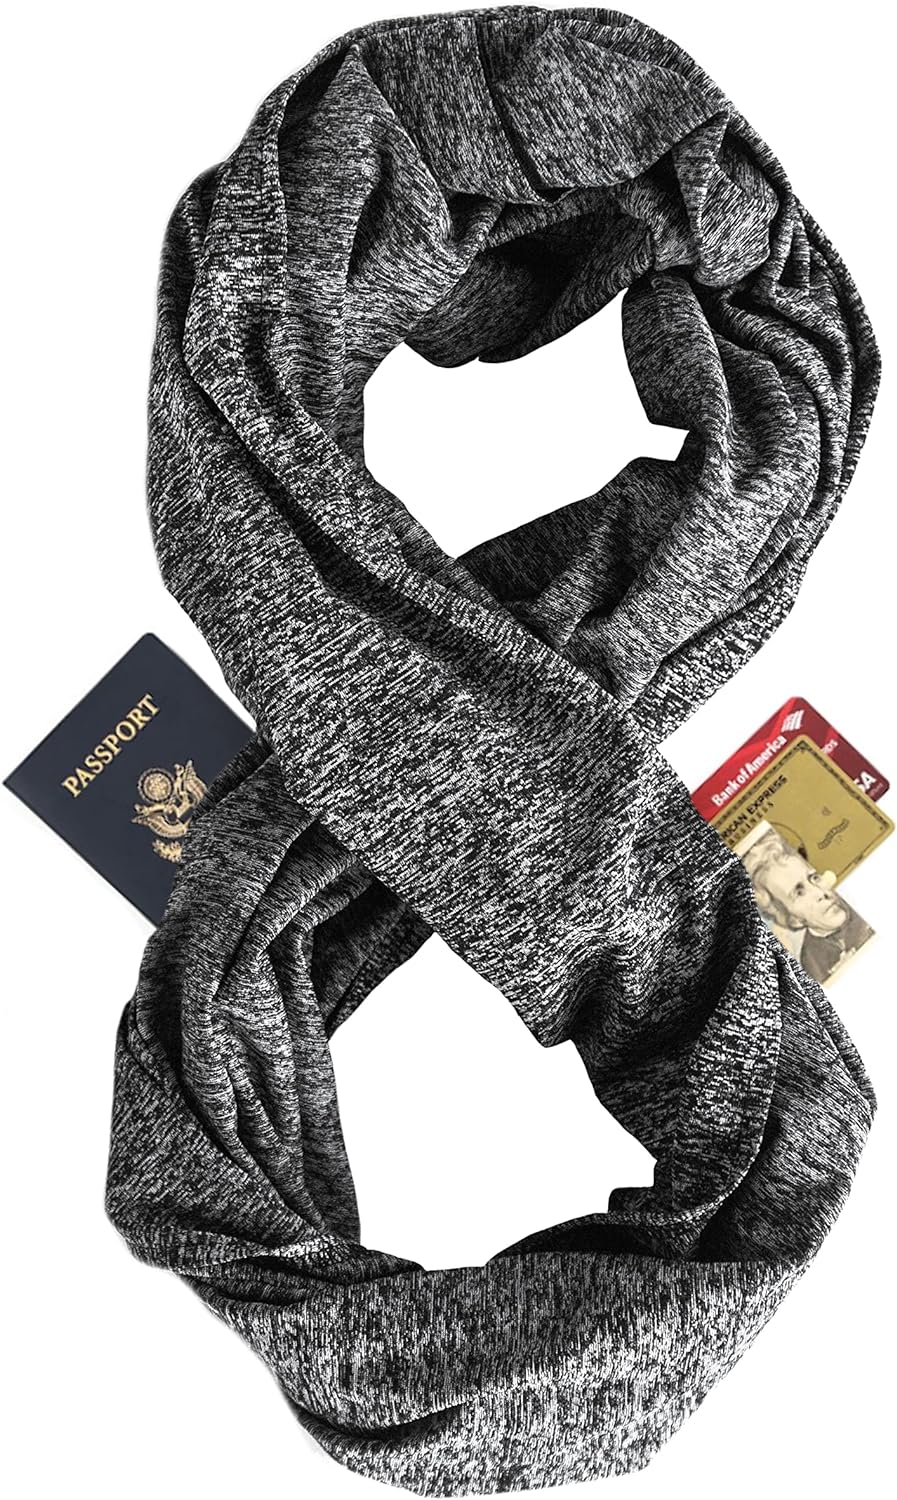 You are currently viewing Travel Scarf: The Ultimate Versatile and Secure Accessory by Zero Grid